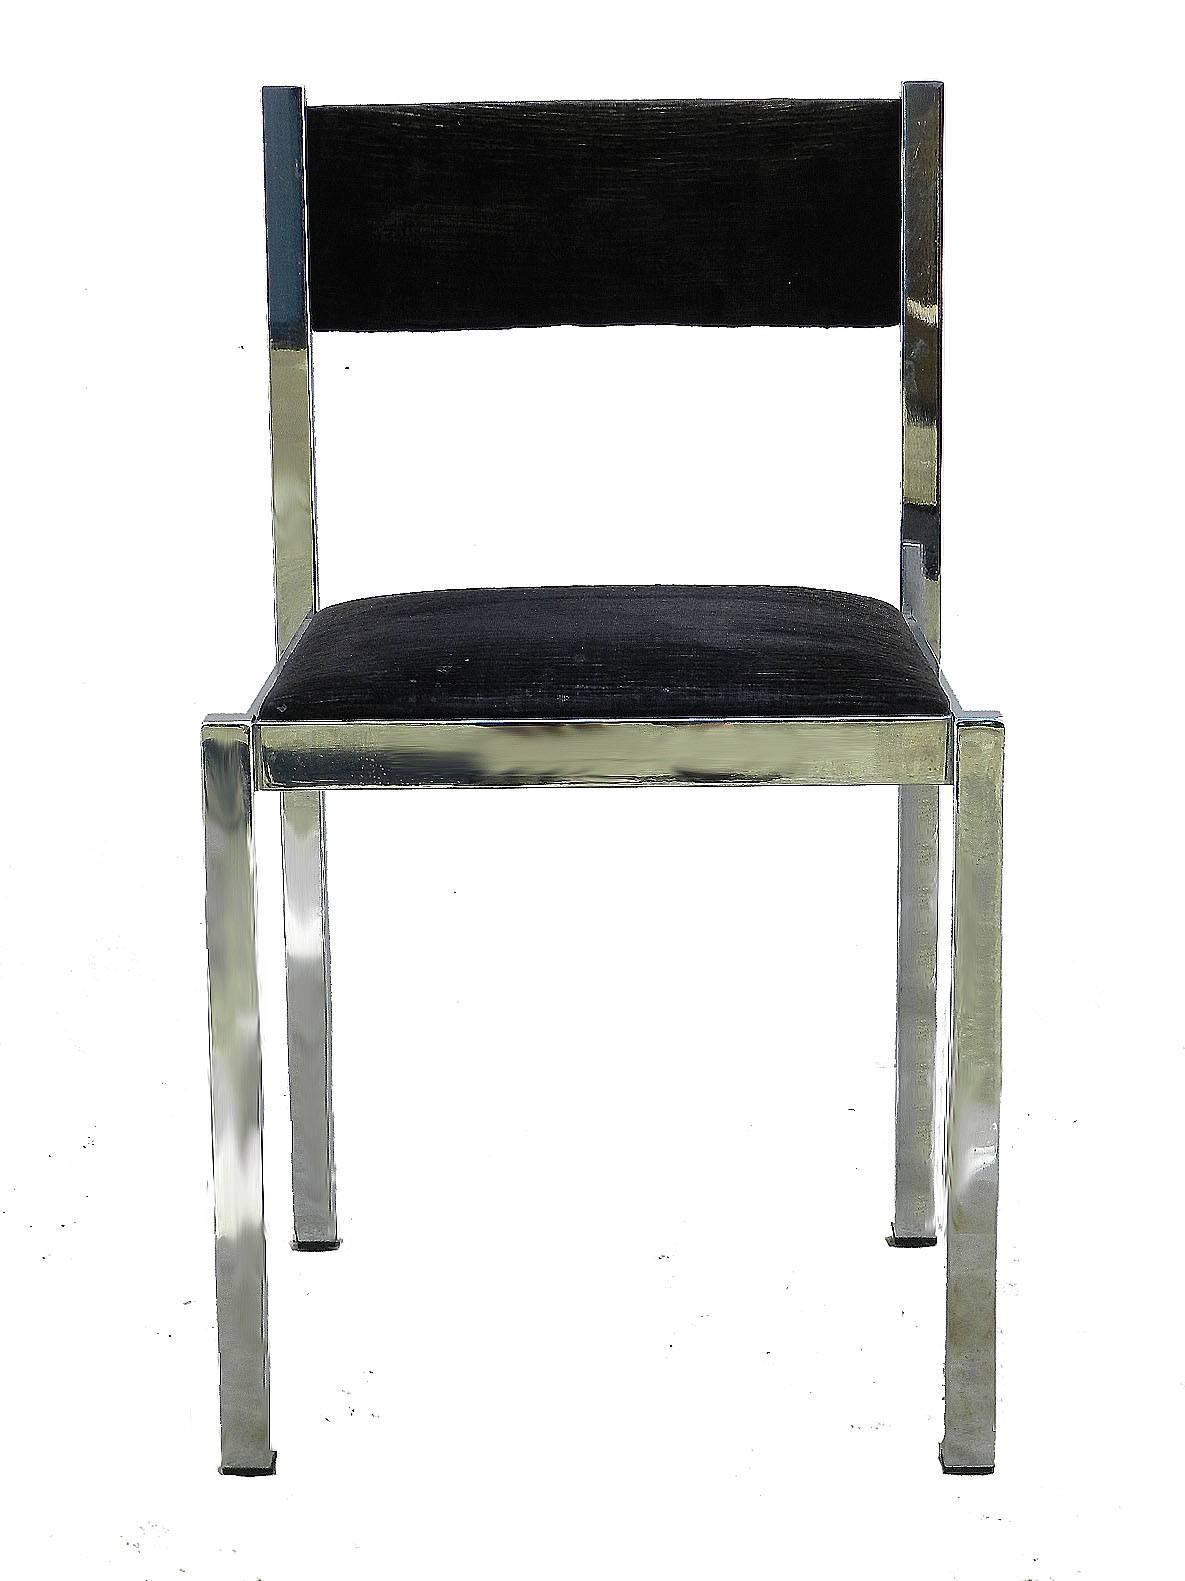 Six midcentury dining chairs from France
Square chrome frame with seat and back upholstered in textured very dark grey velvet 
In the manner of Milo Baughman. 
Chrome frames in very good condition 
The fabric is clean faded through time with signs